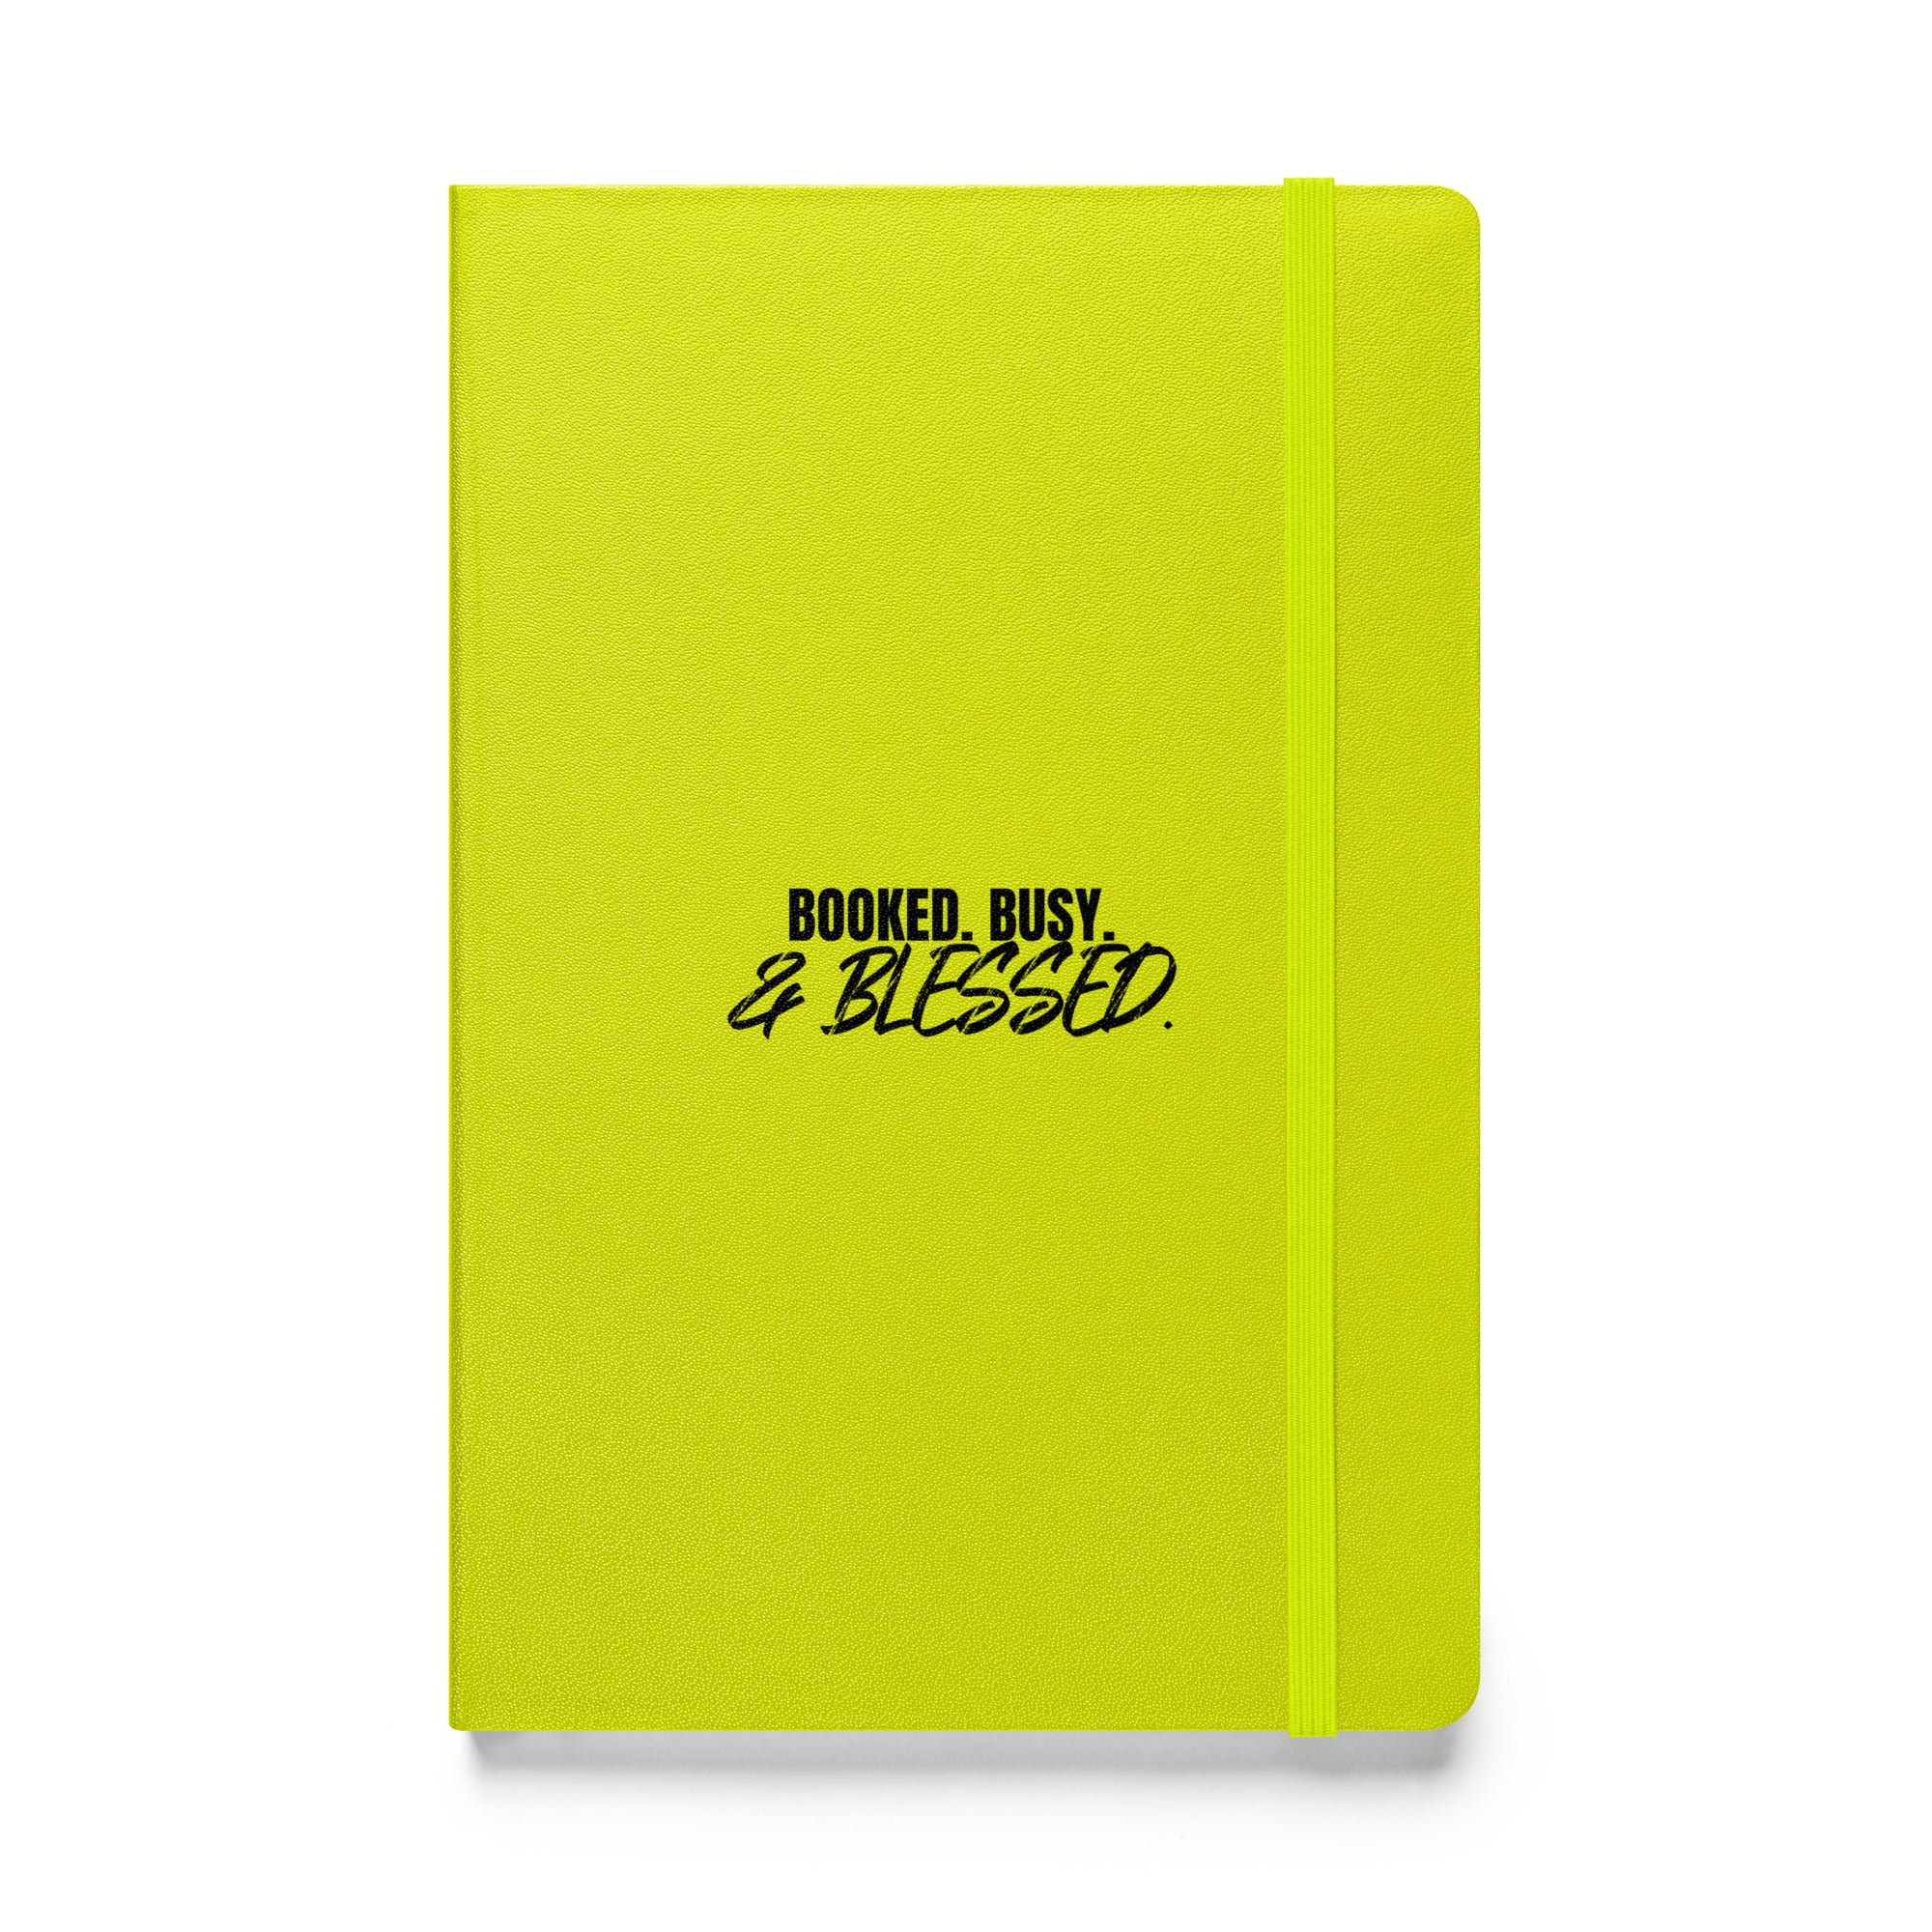 Booked. Busy. & Blessed Hardcover bound notebook - Nailah Renae